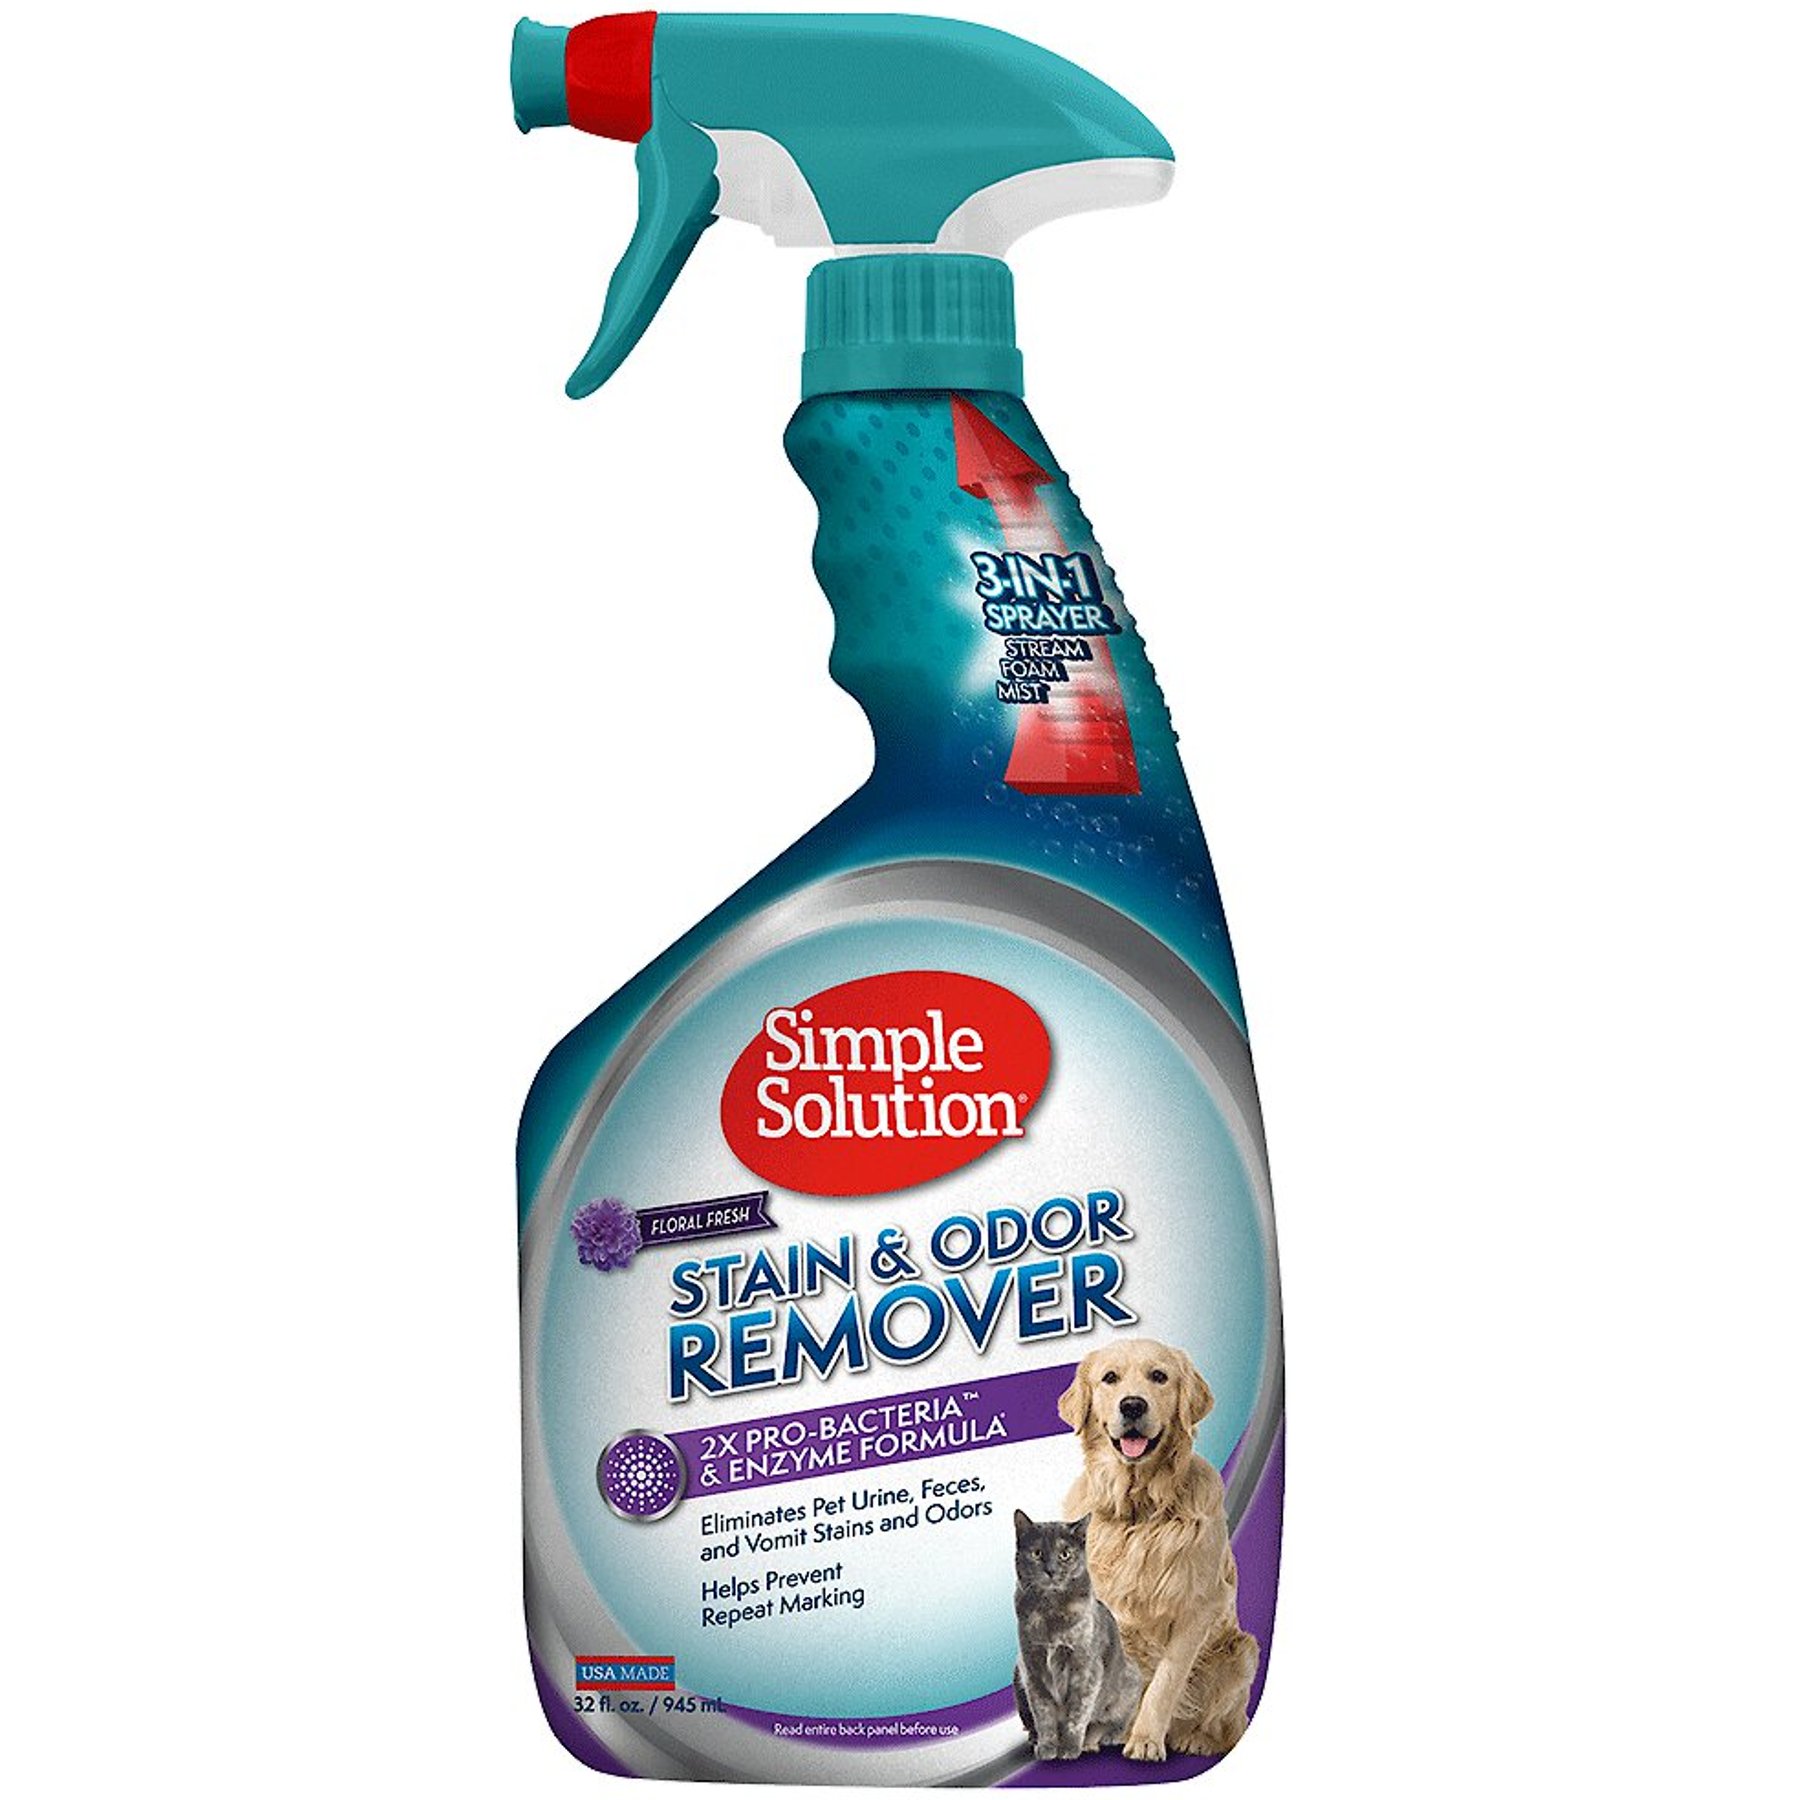 Carbona Oxy Powered Pet Stain Odor Remover, 22 Fluid Ounce